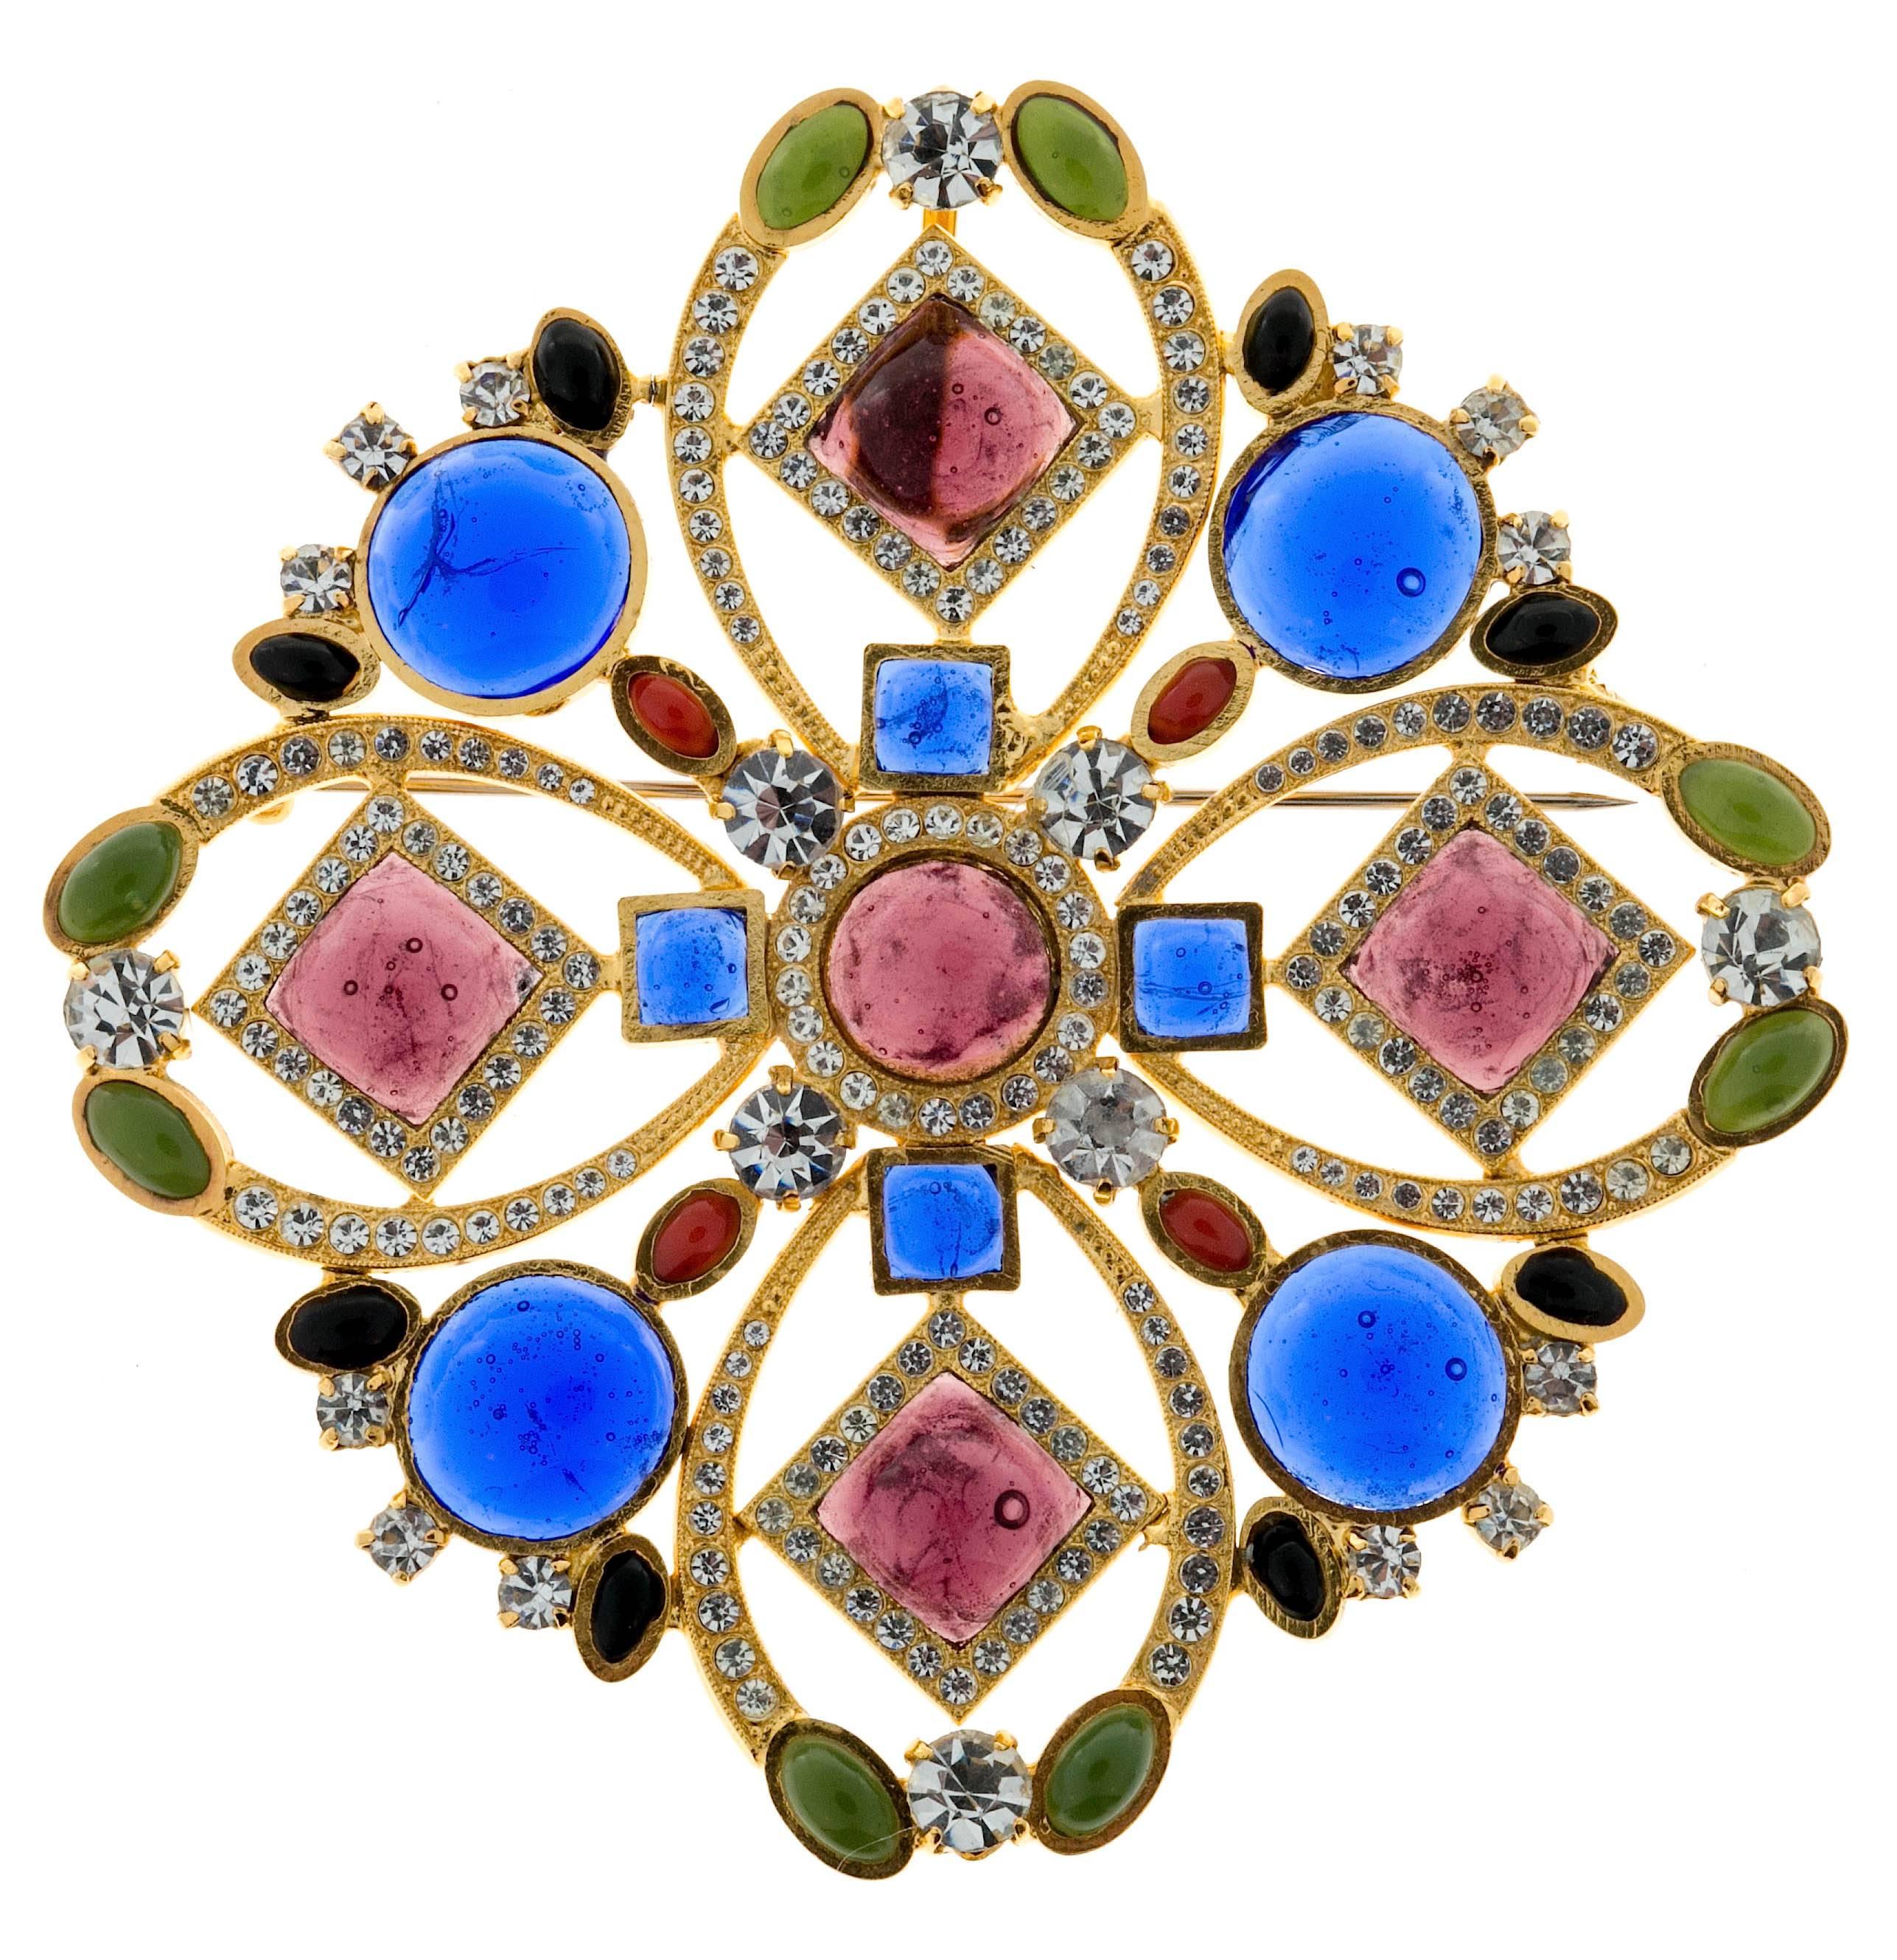 Ca. 1980's an exquisite, rare and wonderful example of the beauty of poured glass and workmanship of the Gripoix family. Avery valued and collectible piece of Butler & Wilson jewelry. 